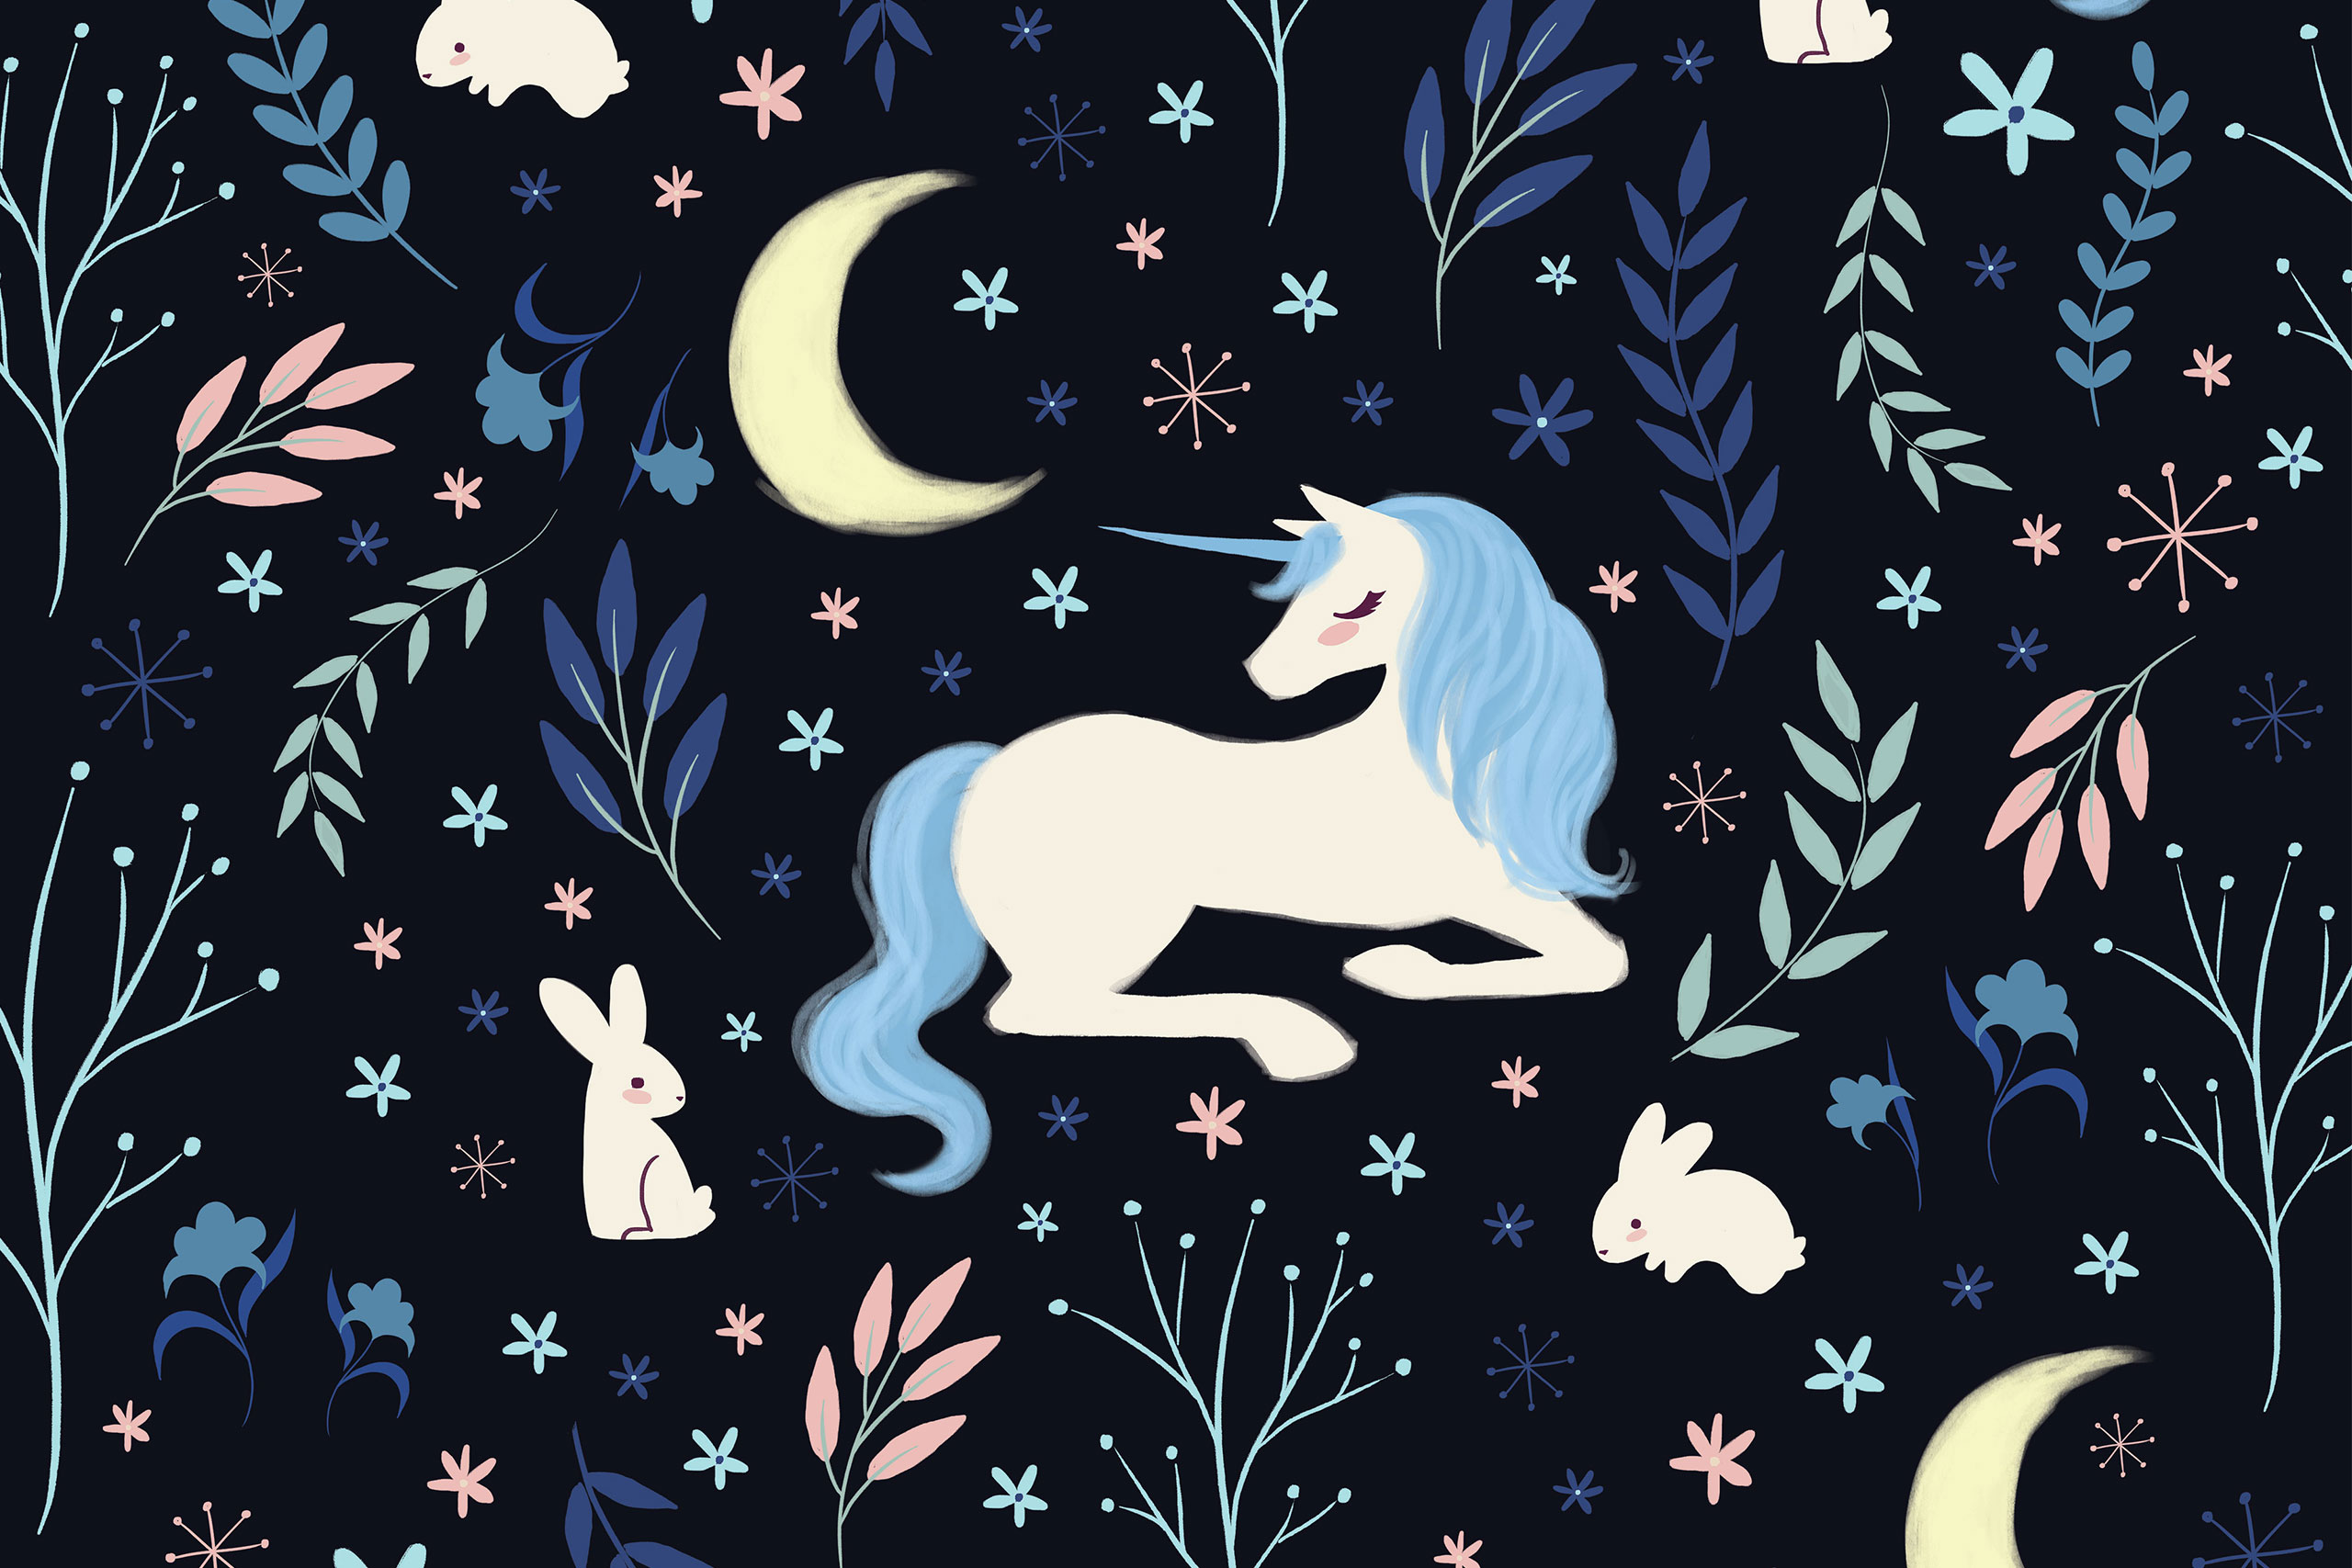 This Unicorn Moon pattern by Lauren Metzler works great for nursery items... baby sheets, quilts, blankets and clothes!